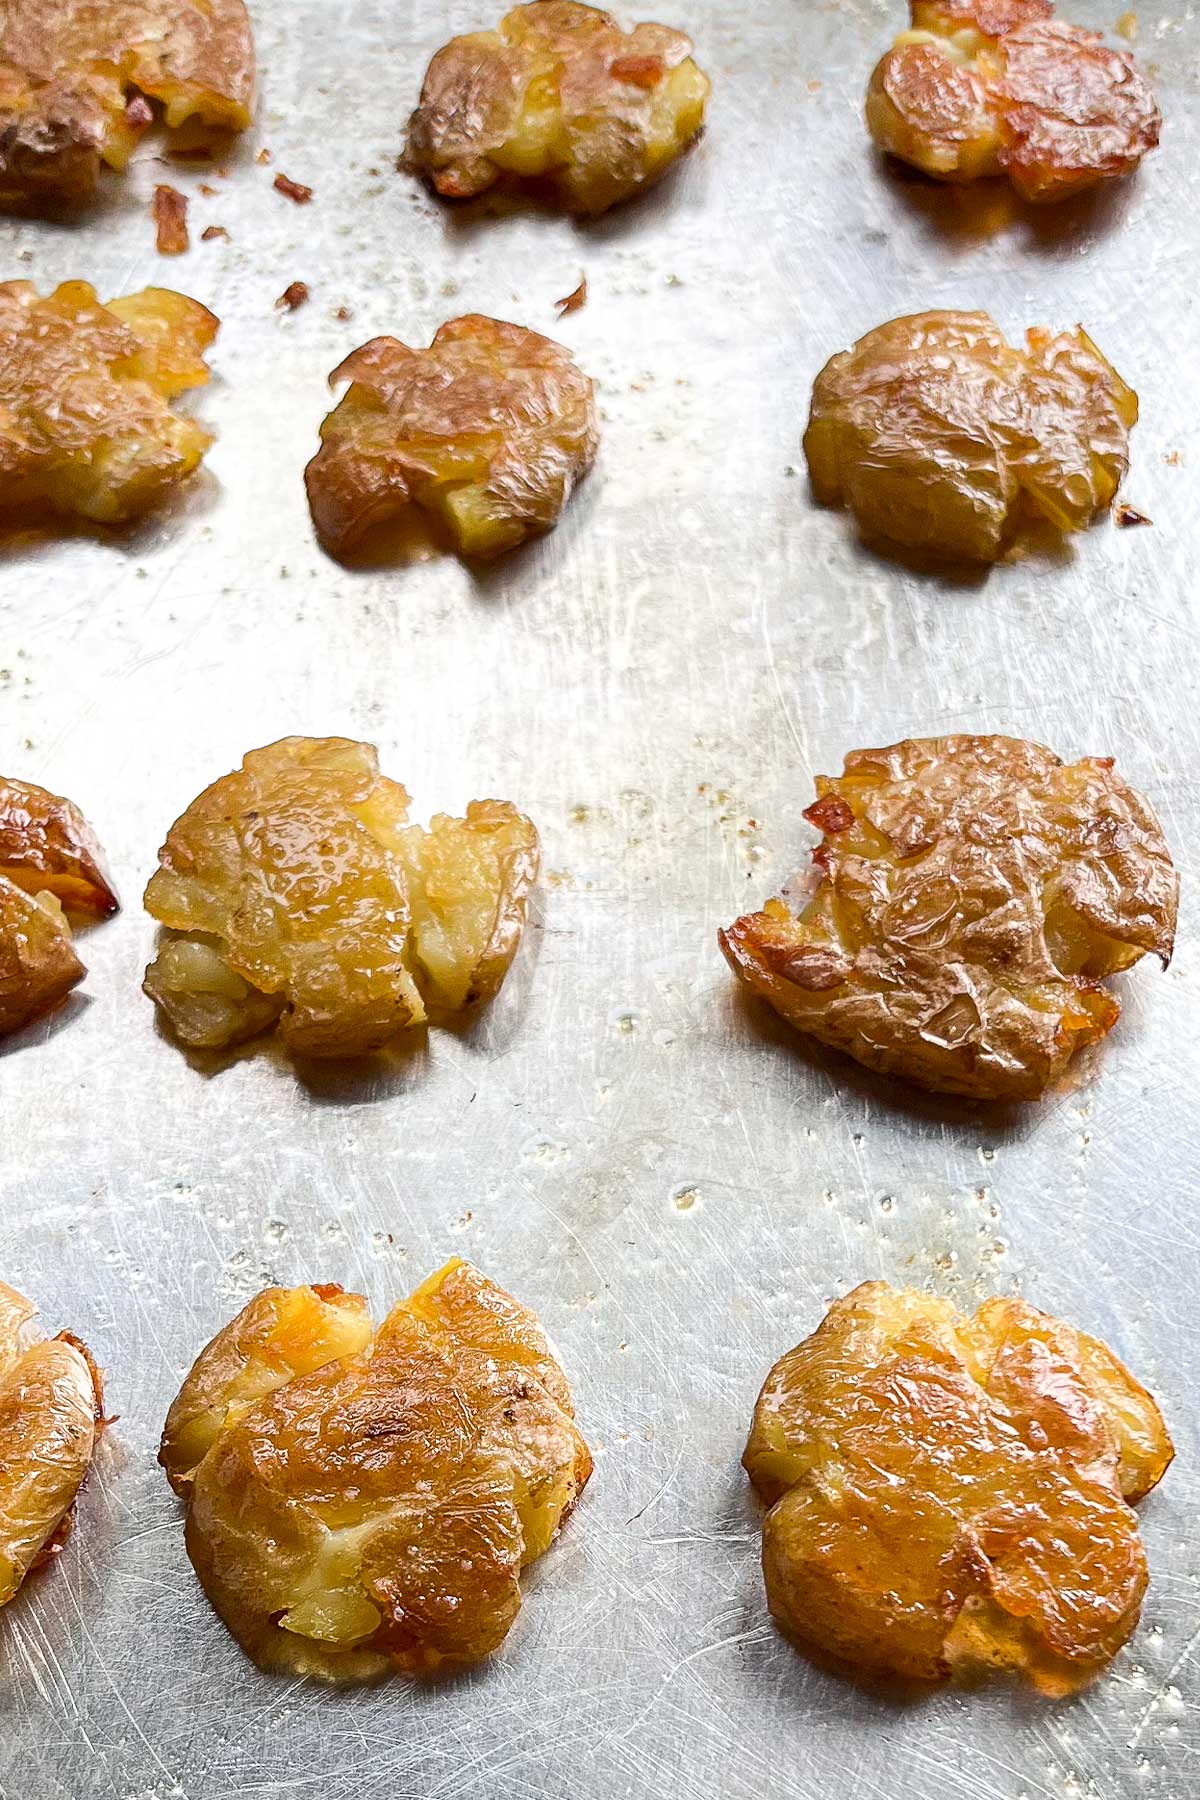 A baking sheet with roasted smashed potatoes evenly spaced, brown and crispy and glistening with olive oil and flakey sea salt.